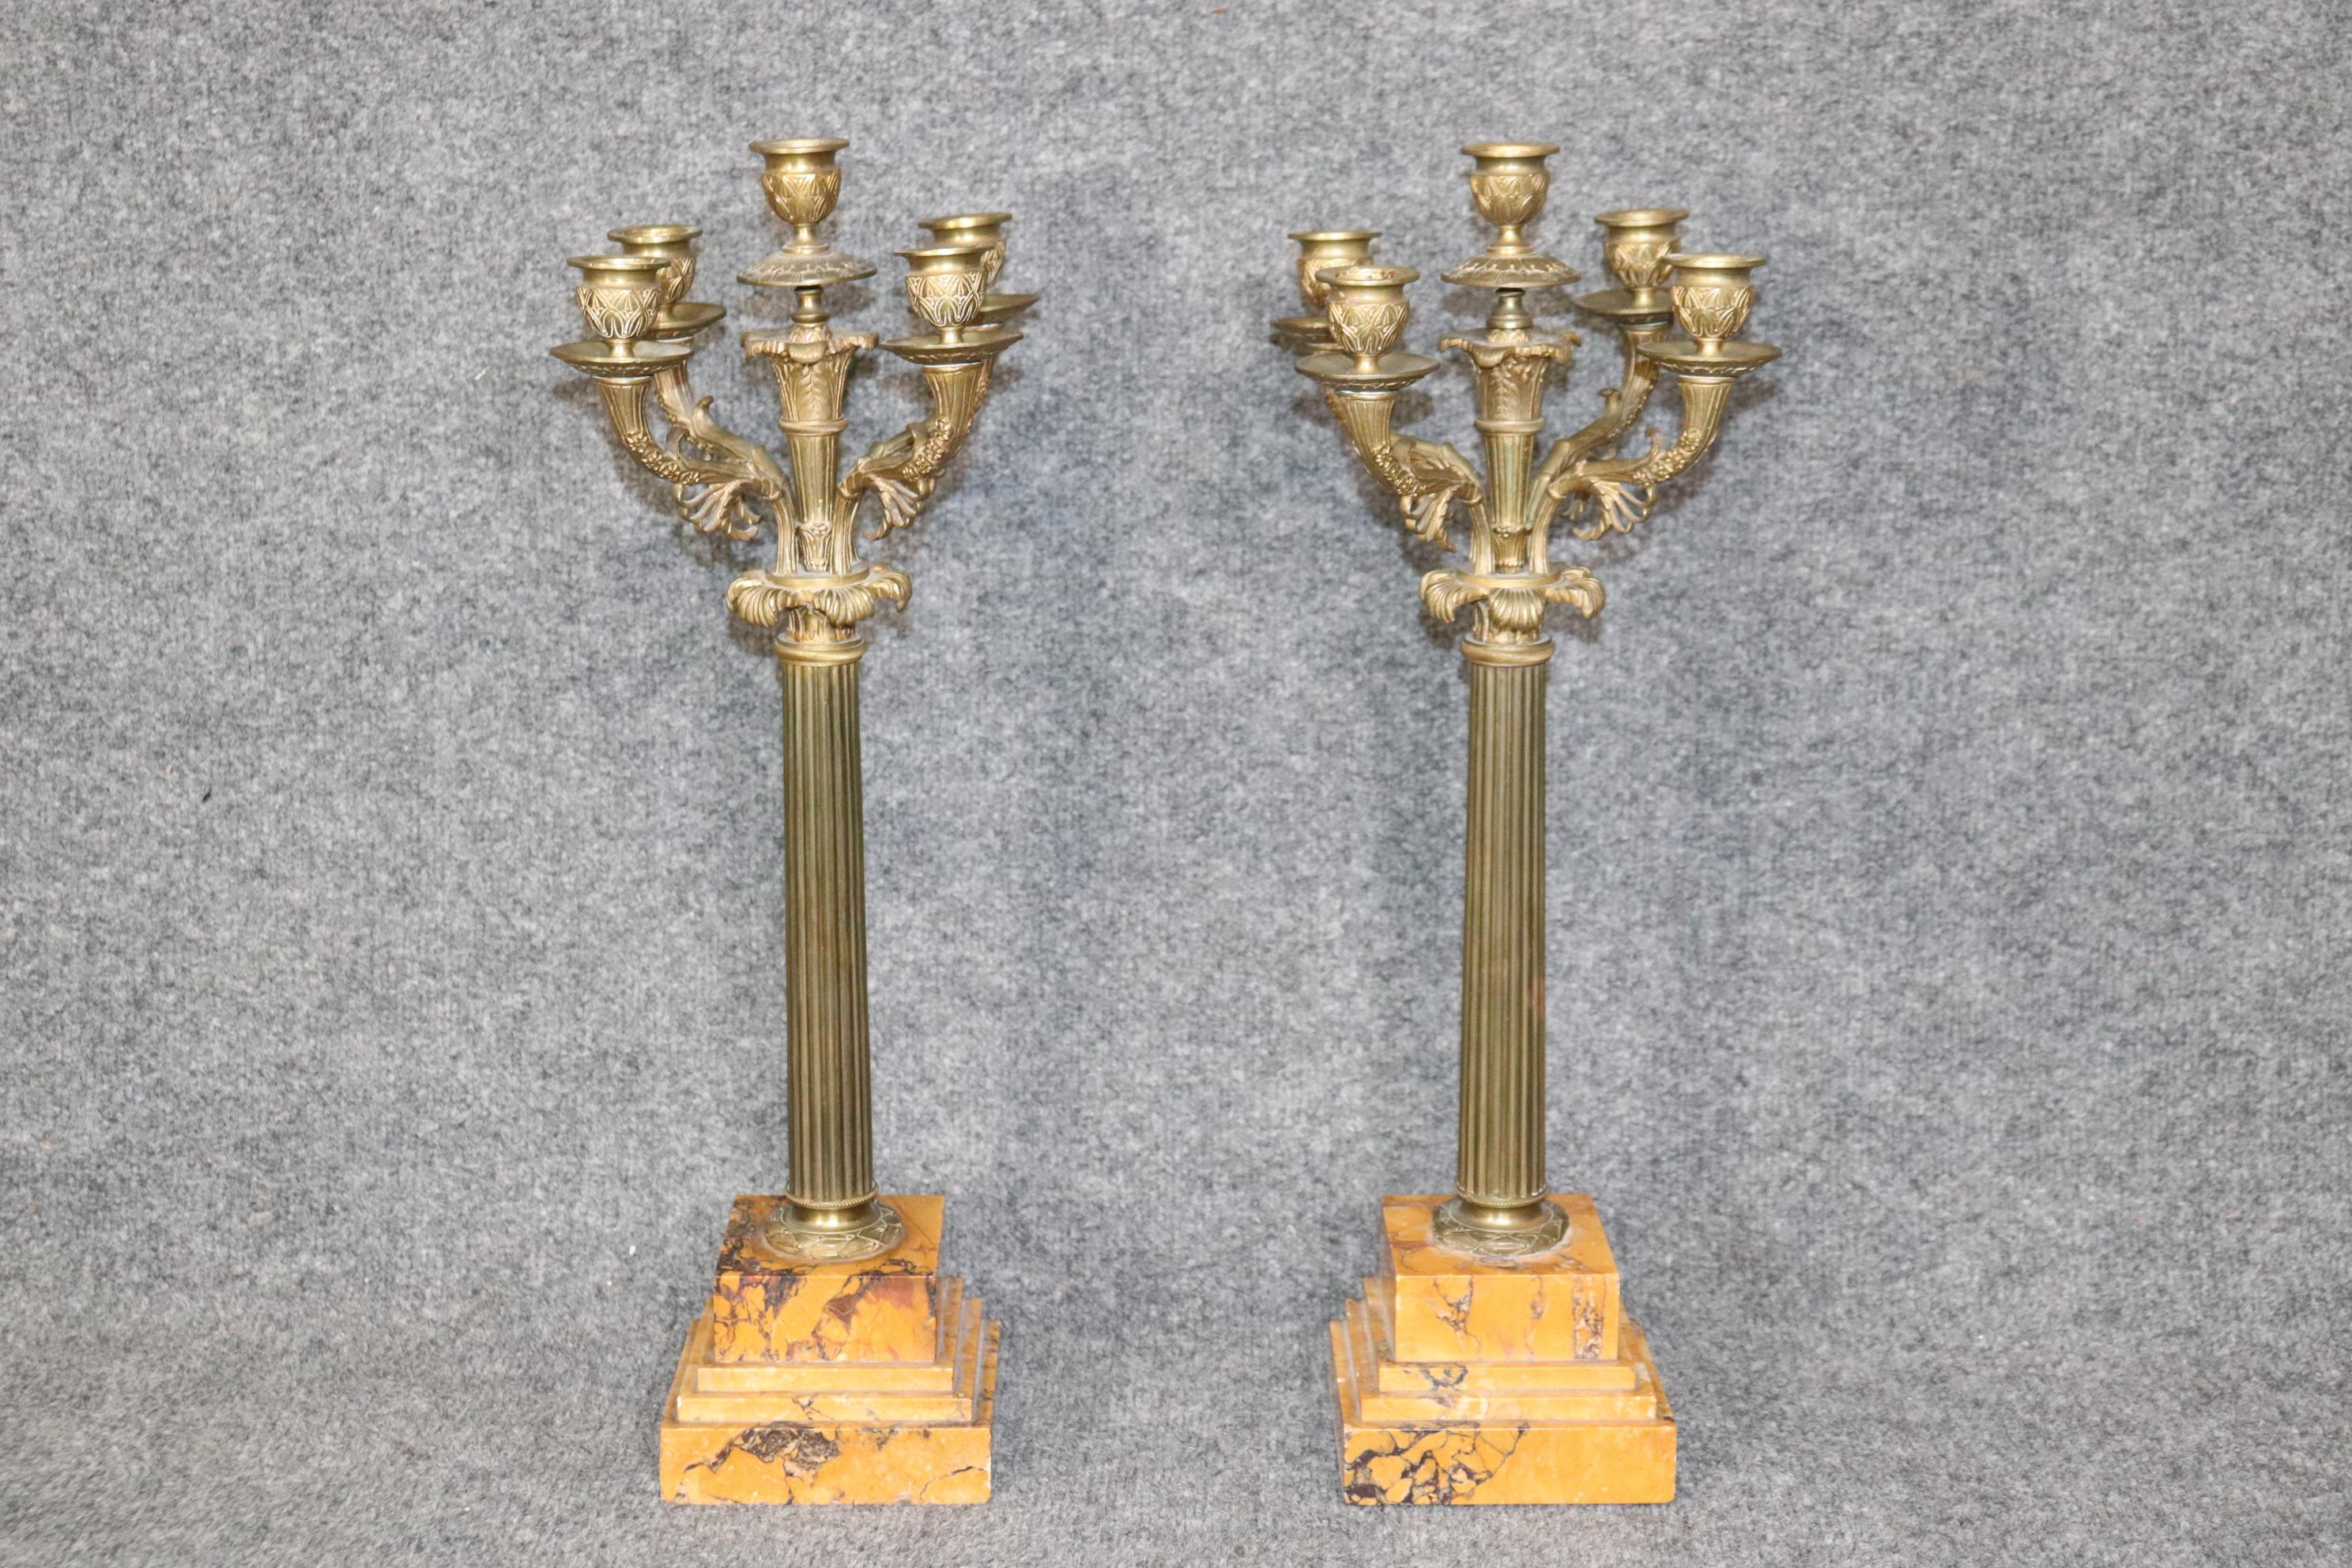 Dimensions: H: 20 1/2in W: 6 3/4in D: 6 3/4in

This beautiful pair of French Empire style 5 light candelabras on marble bases are made from the highest quality bronze. The craftsmanship of these candelabras are breath taking! If you look closely,